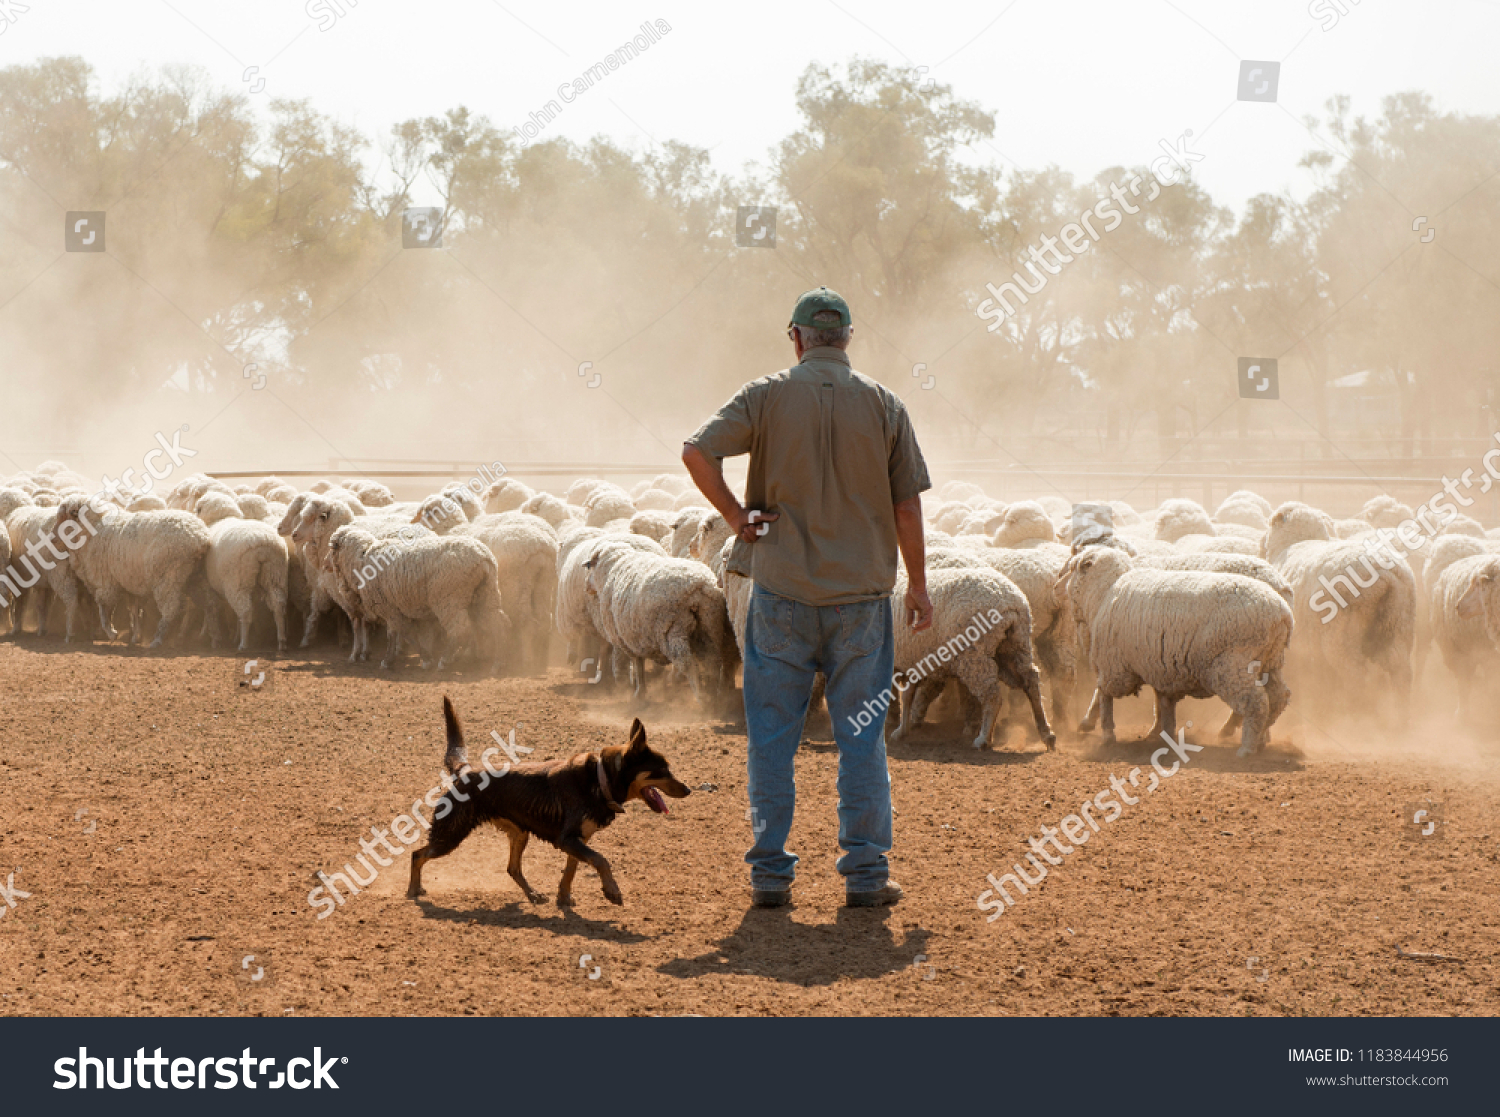 sheep mustering in outback New South Wales, Australia. #1183844956